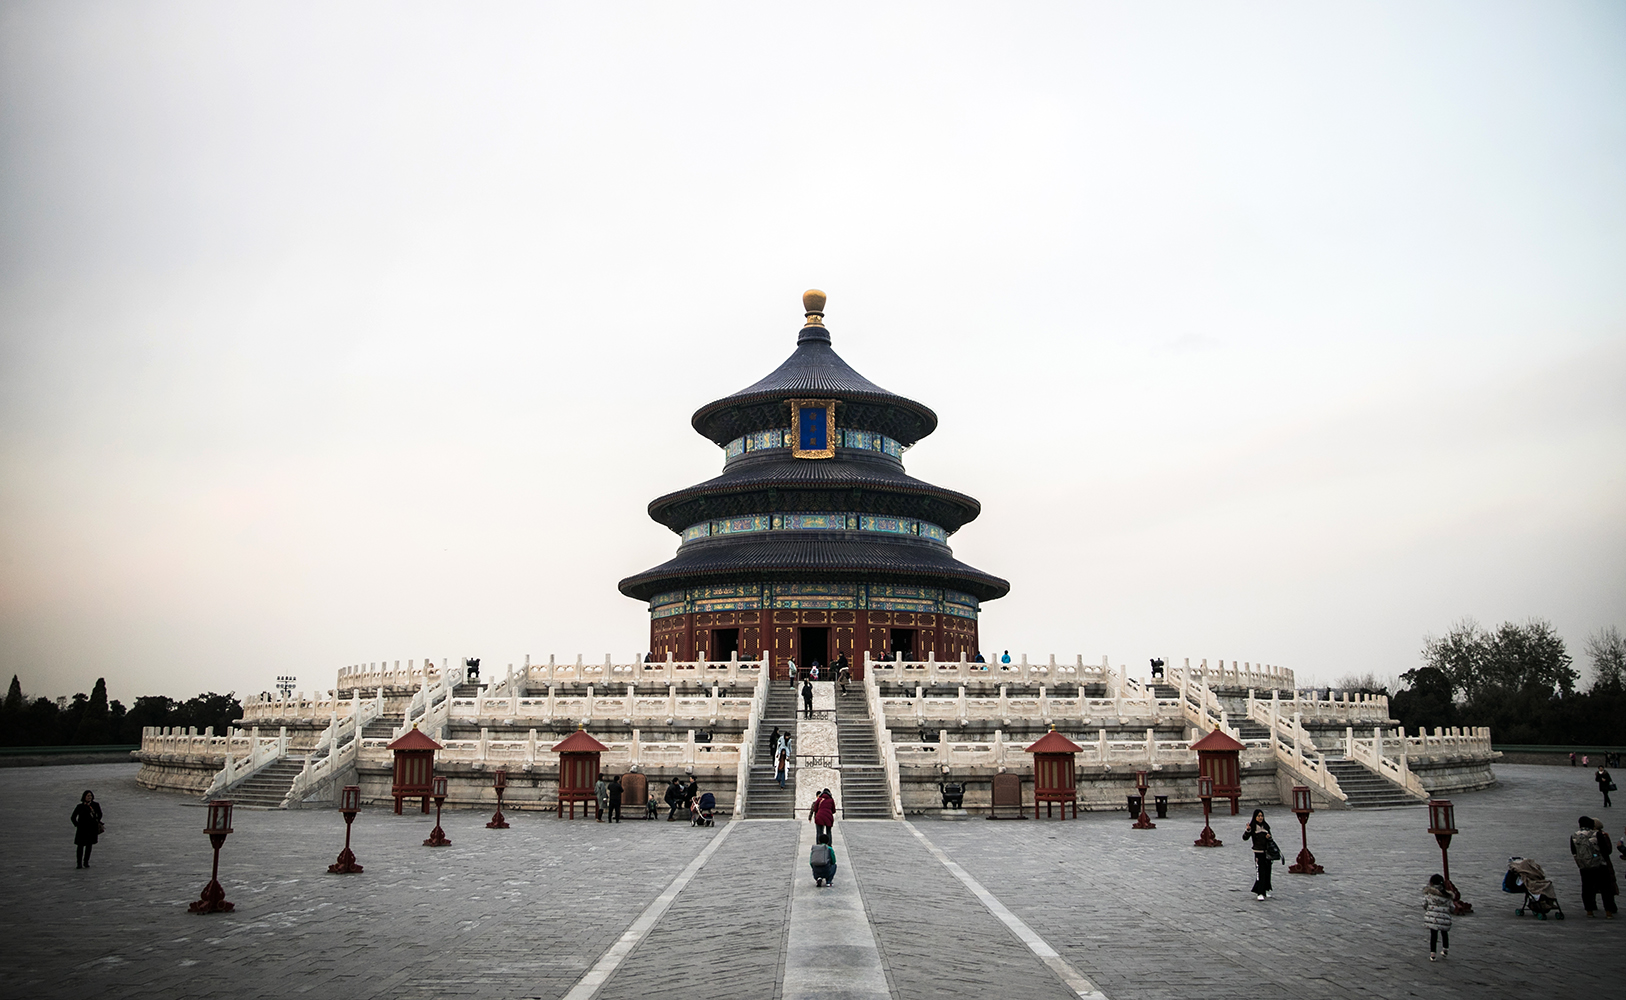 The Temple of Heaven in Beijing, China, where hundreds of tourist gather each year to see the spectacular buildings on the grounds. The park just outside, however, is a very popular place to play "Xiangqi", which is Chinese chess.